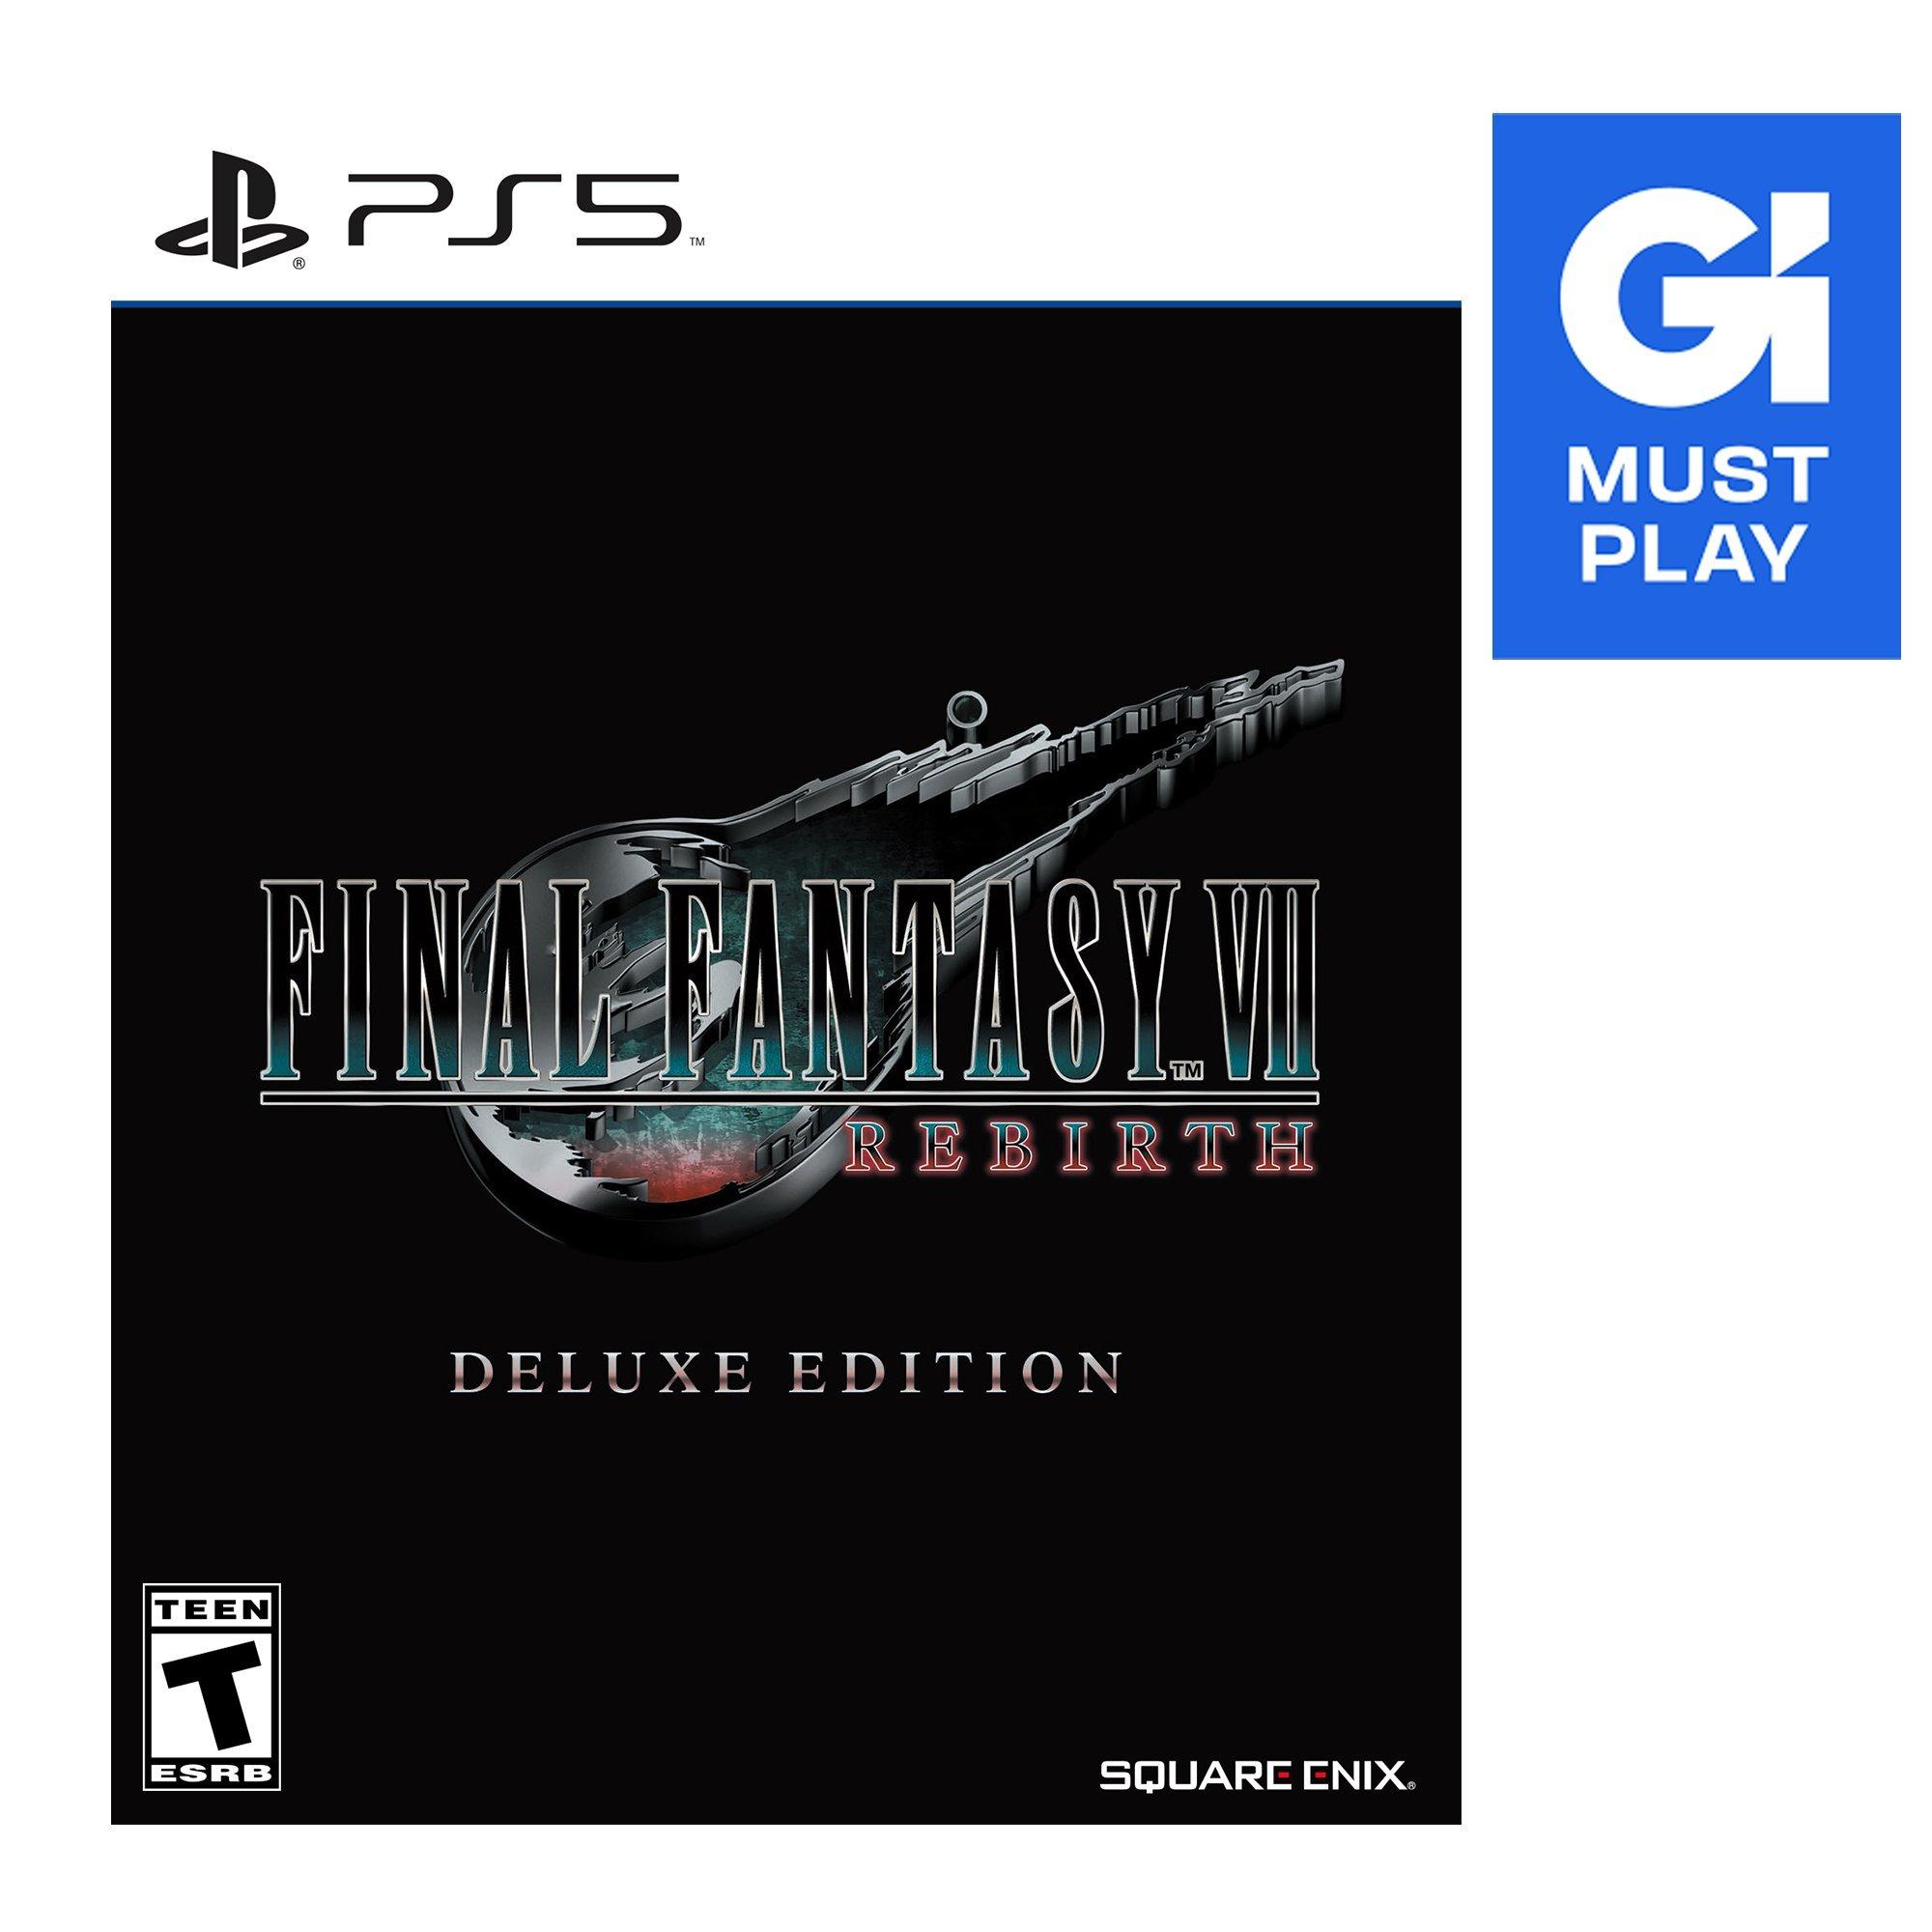 FINAL FANTASY VII REBIRTH launch date and preorder information